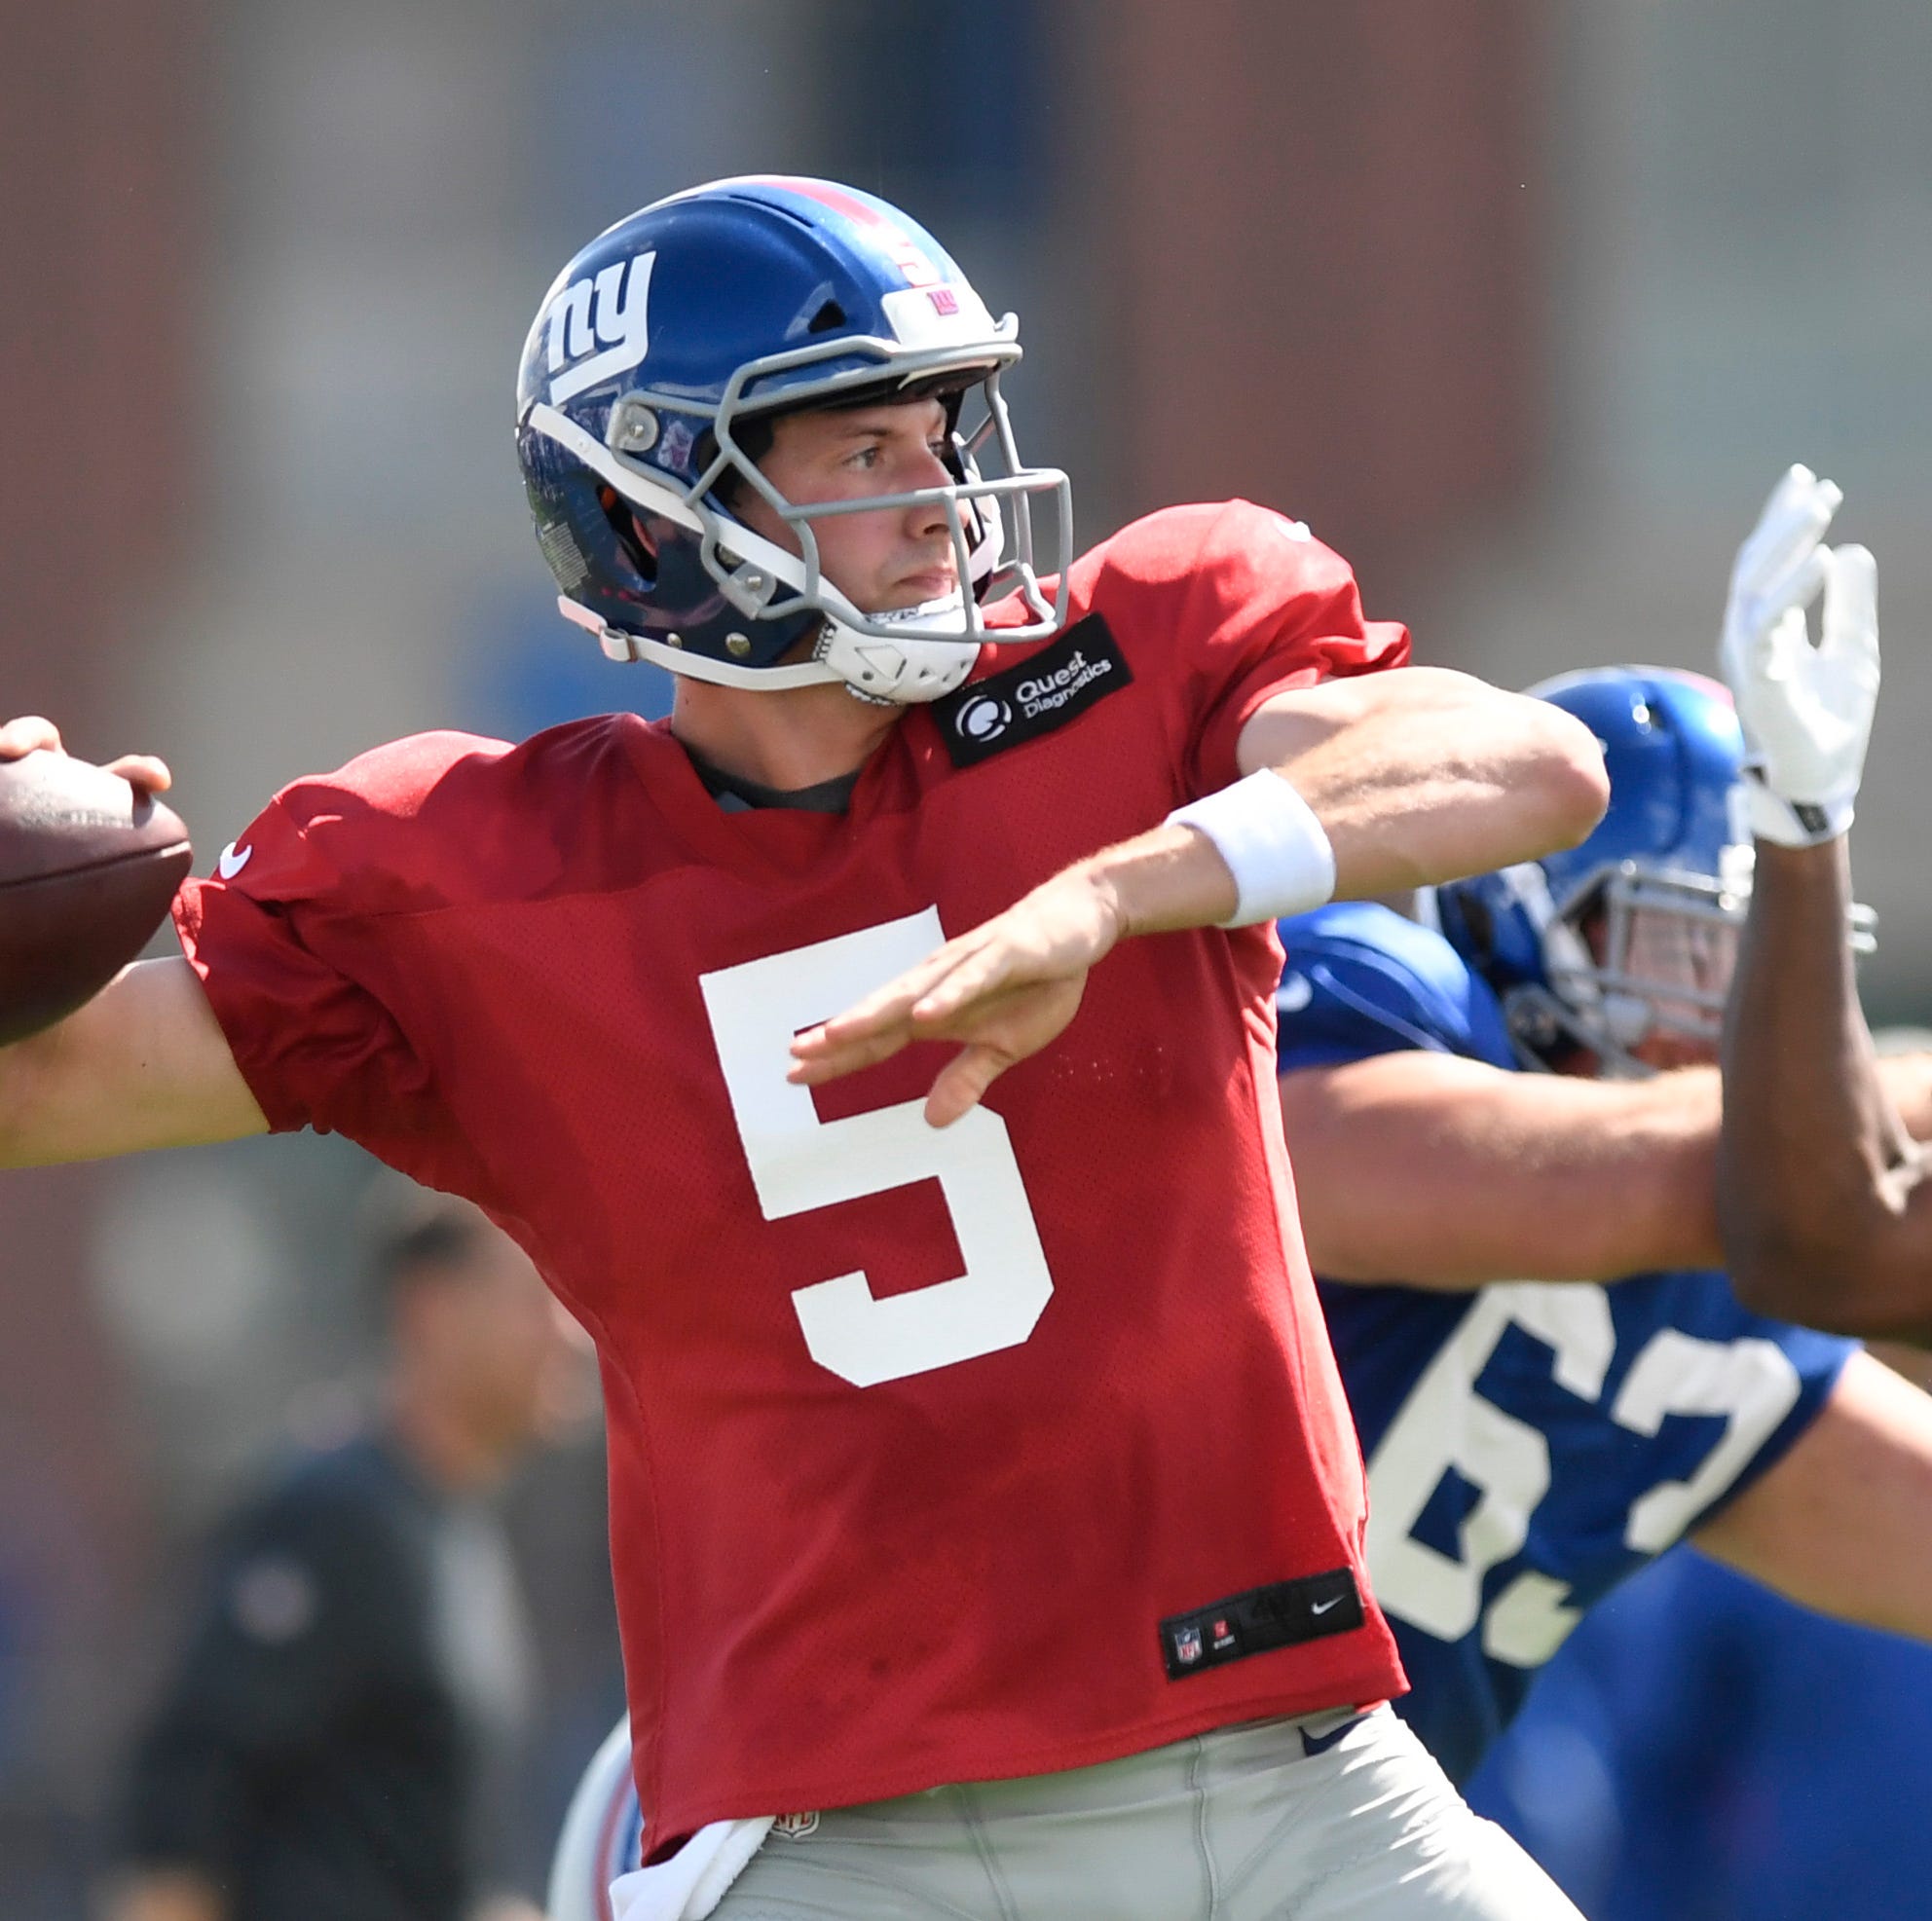 New York Giants quarterback Davis Webb (5) throwing the ball during NFL training camp in East Rutherford, NJ on Wednesday, August 1, 2018.